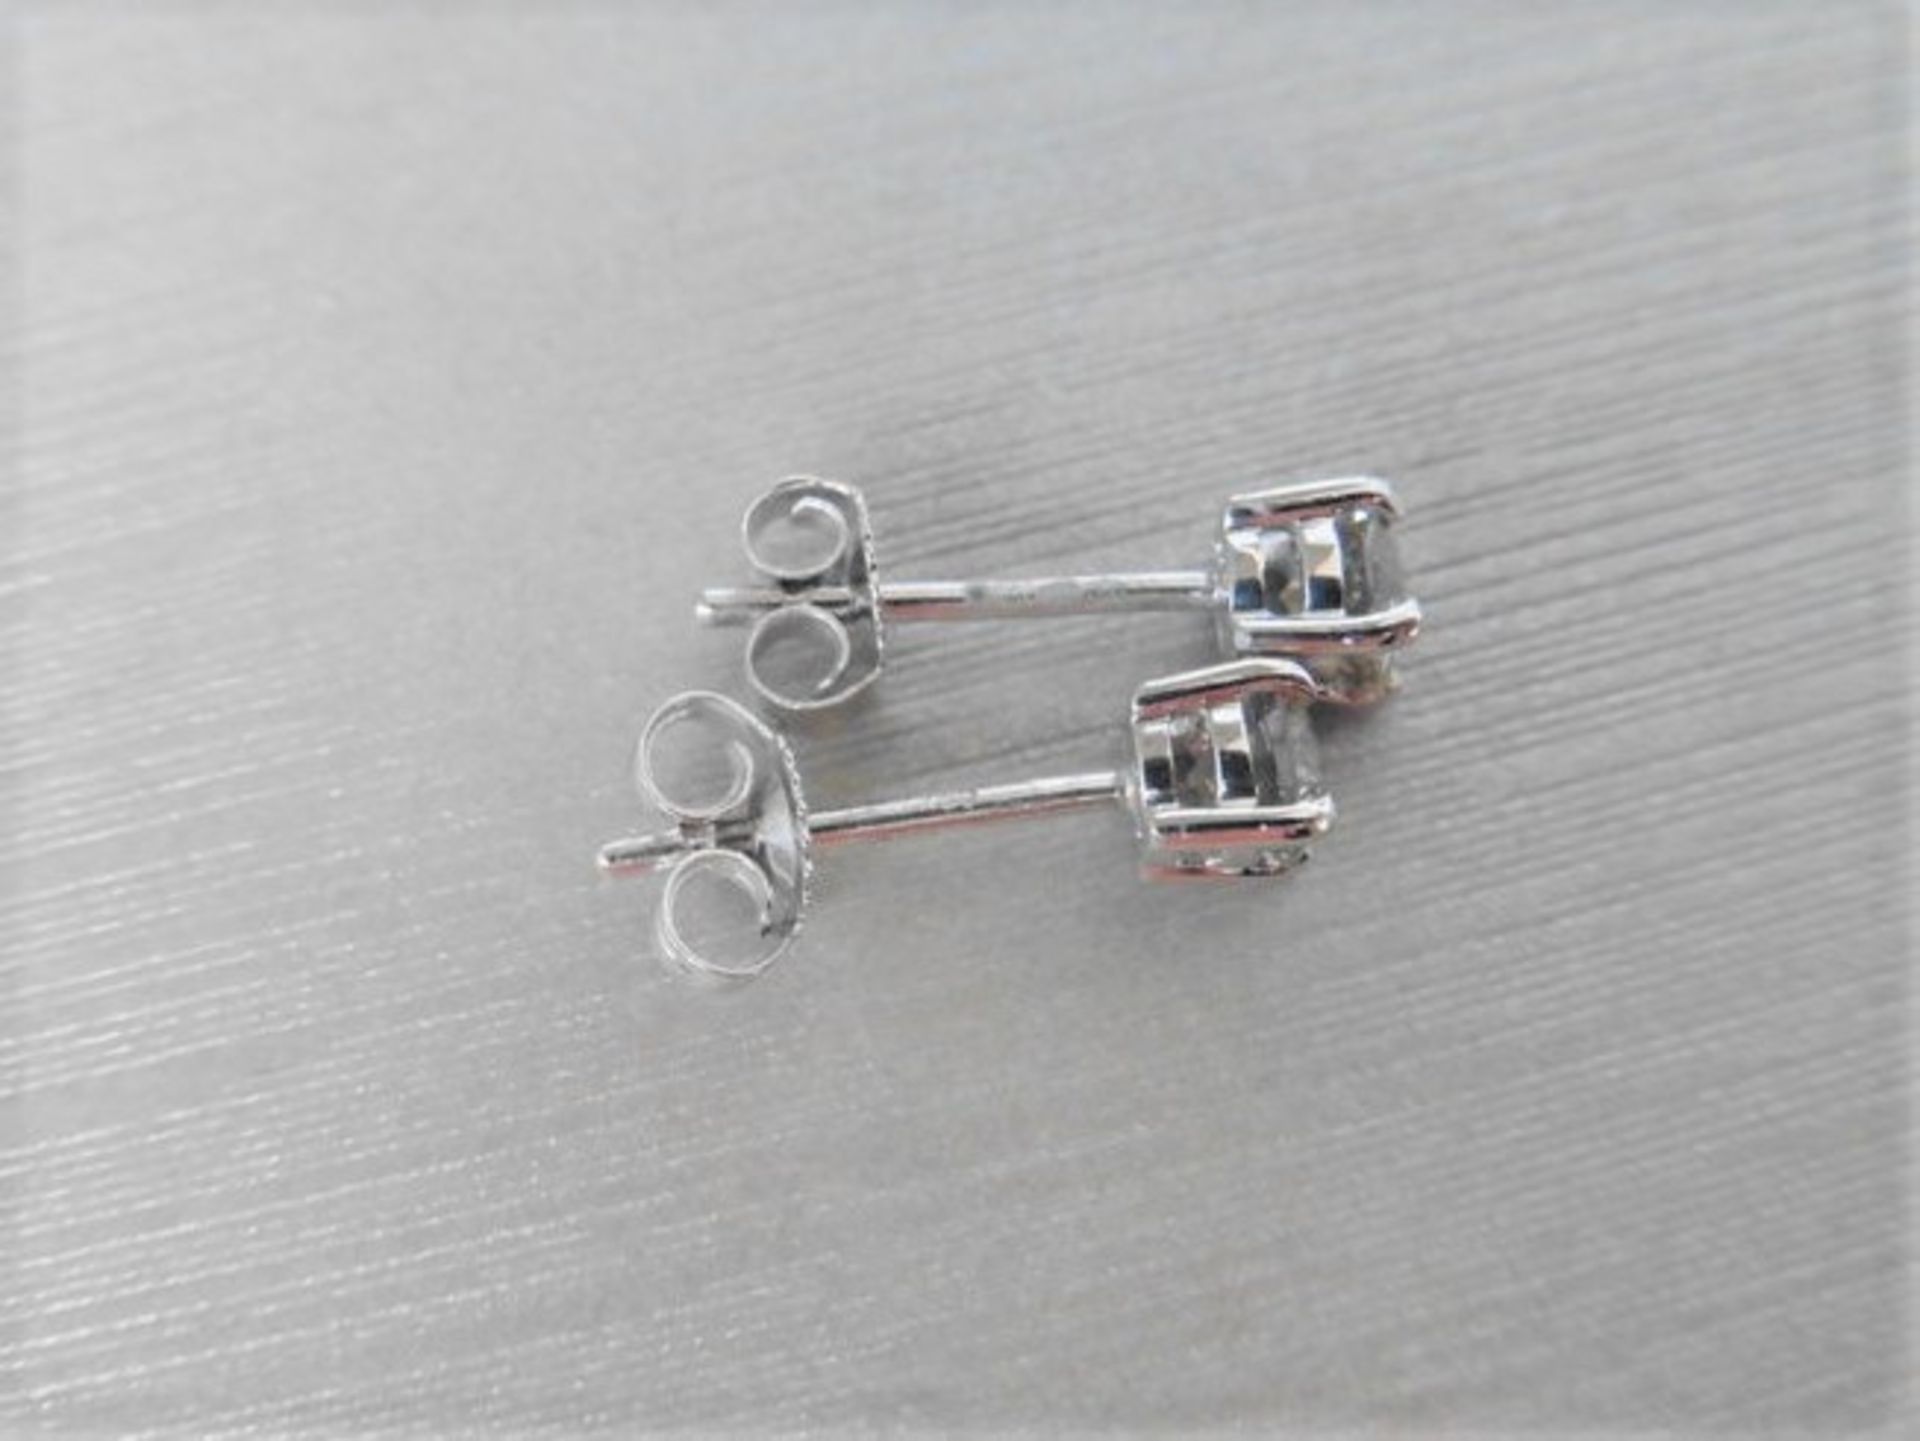 1.20ct diamond solitaire earrings set in 18ct white gold. 2 x brilliant cut diamonds, 0.60ct ( - Image 2 of 2